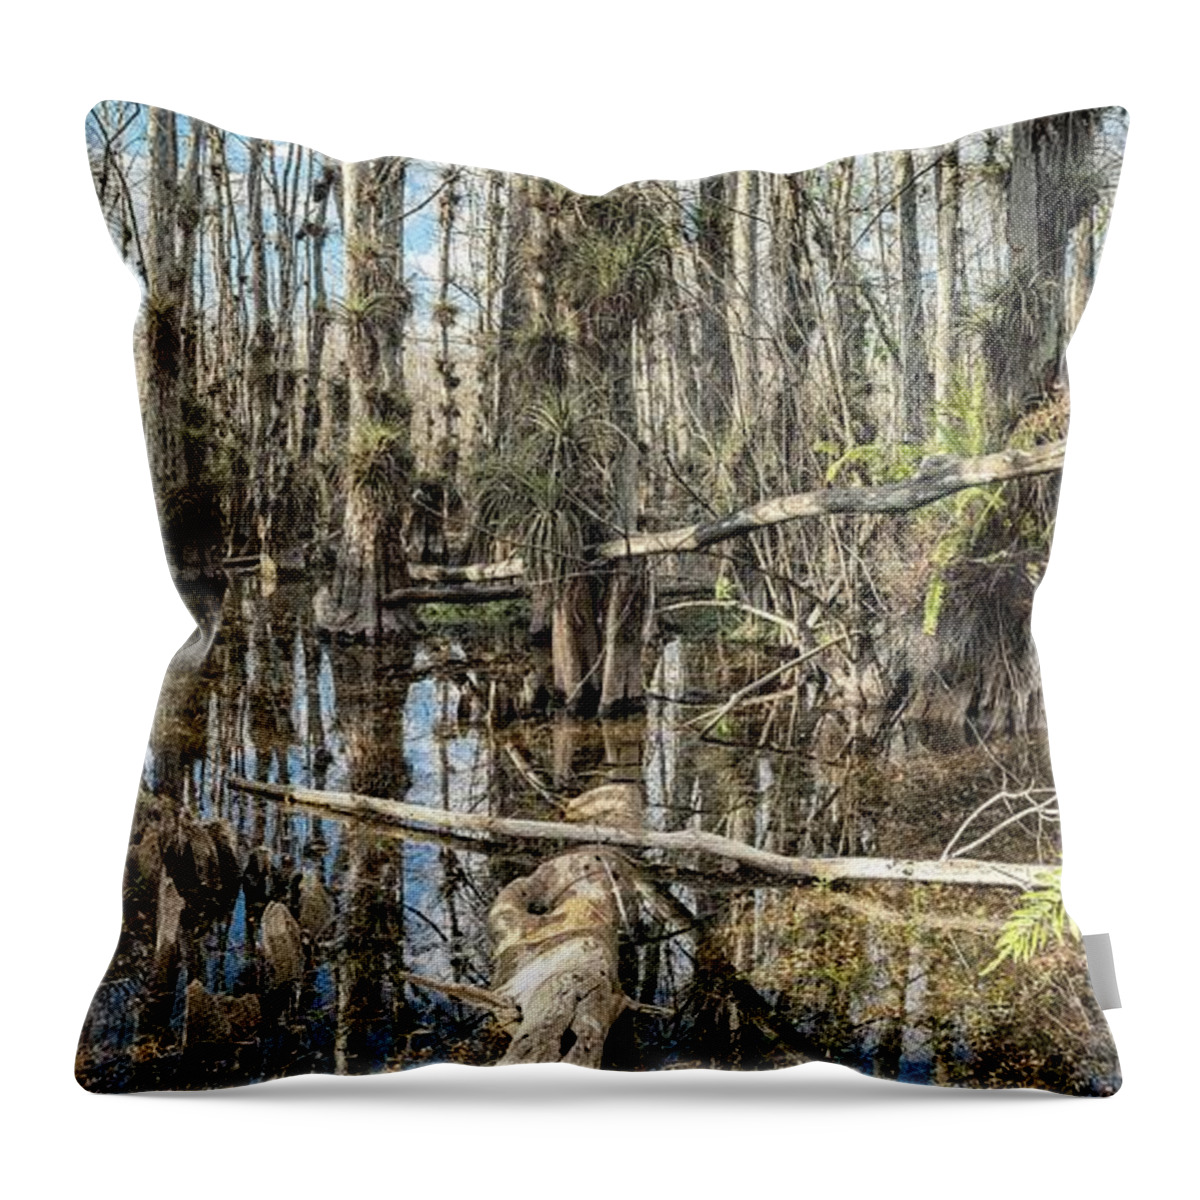 Big Cypress National Preserve Throw Pillow featuring the photograph Big Cypress Wilderness by Rudy Wilms